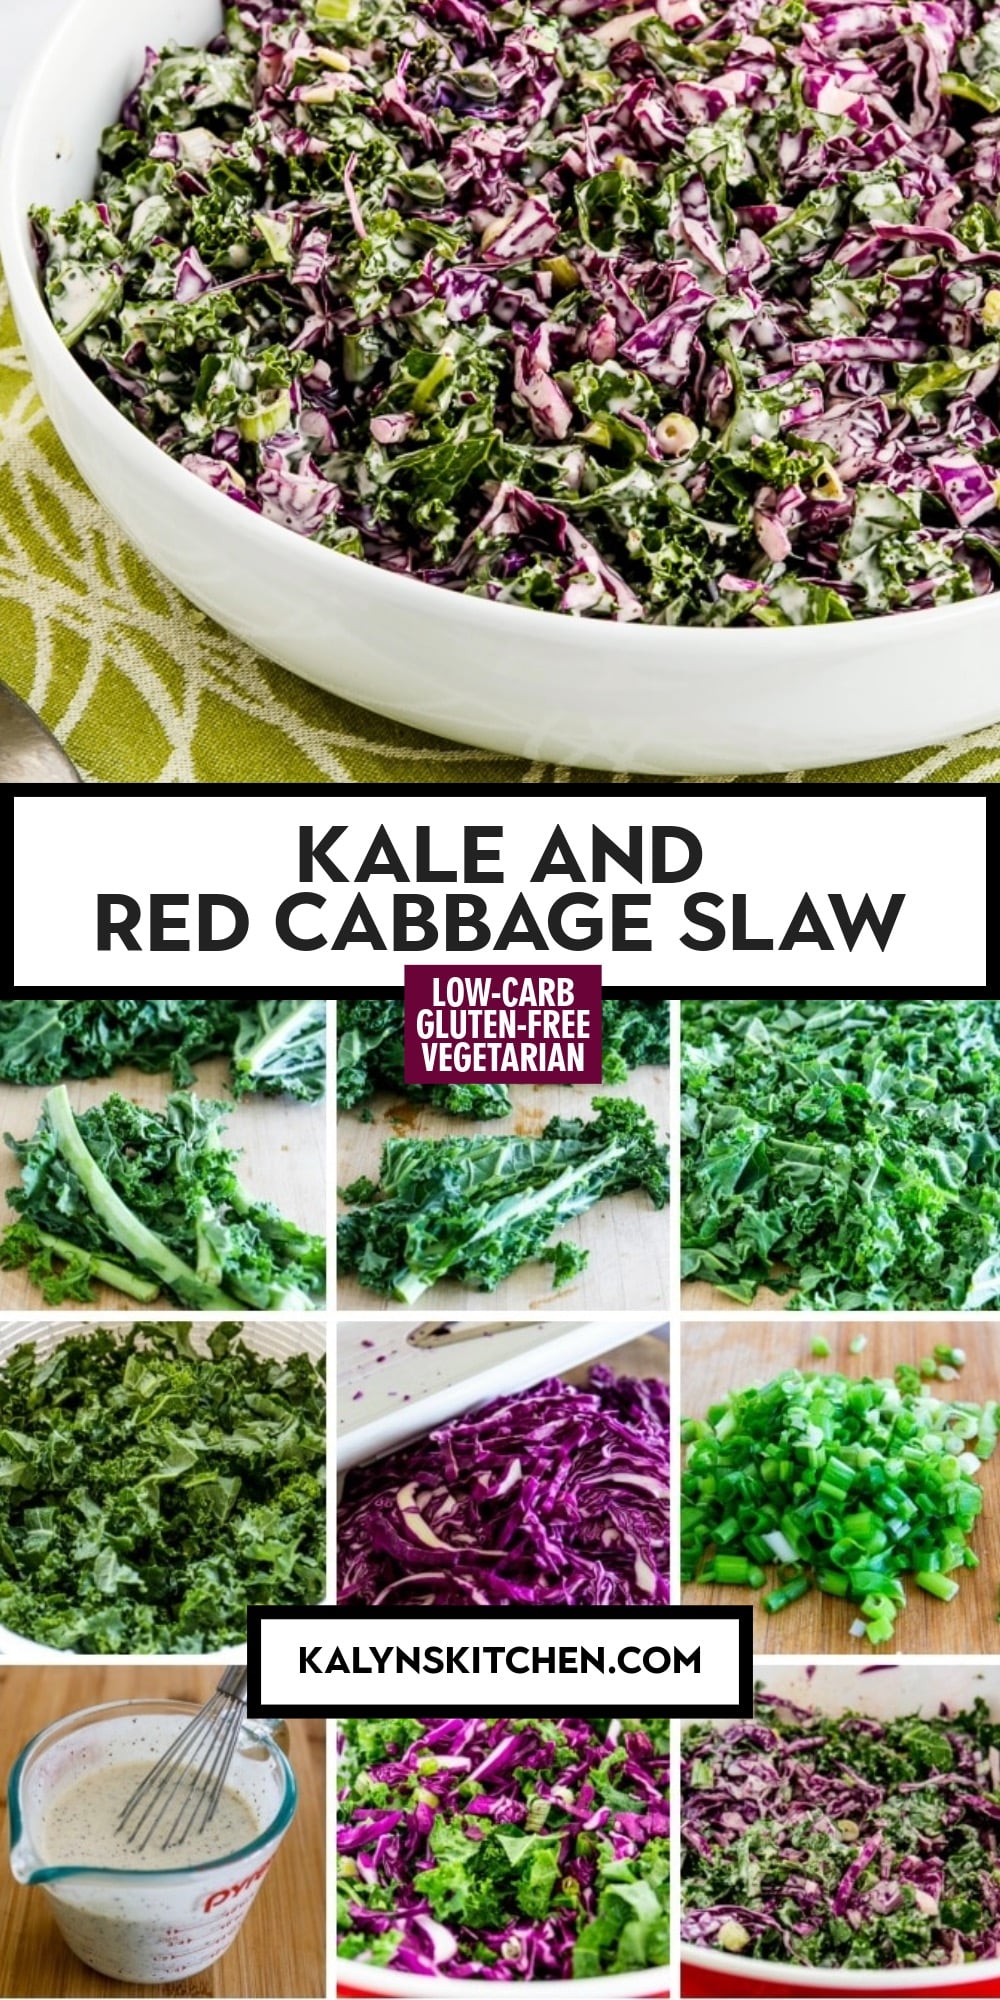 If you even slightly like the flavor of raw kale you're going to love this Kale and Red Cabbage Slaw, and this is good any time of year! And even if you're not that big of a fan of kale, if you like sweet red cabbage I bet you'll enjoy this kale and cabbage salad. [found on KalynsKitchen.com] #KaleCabbageSlaw #KaleCabbageSalad #KaleRedCabbageSlaw